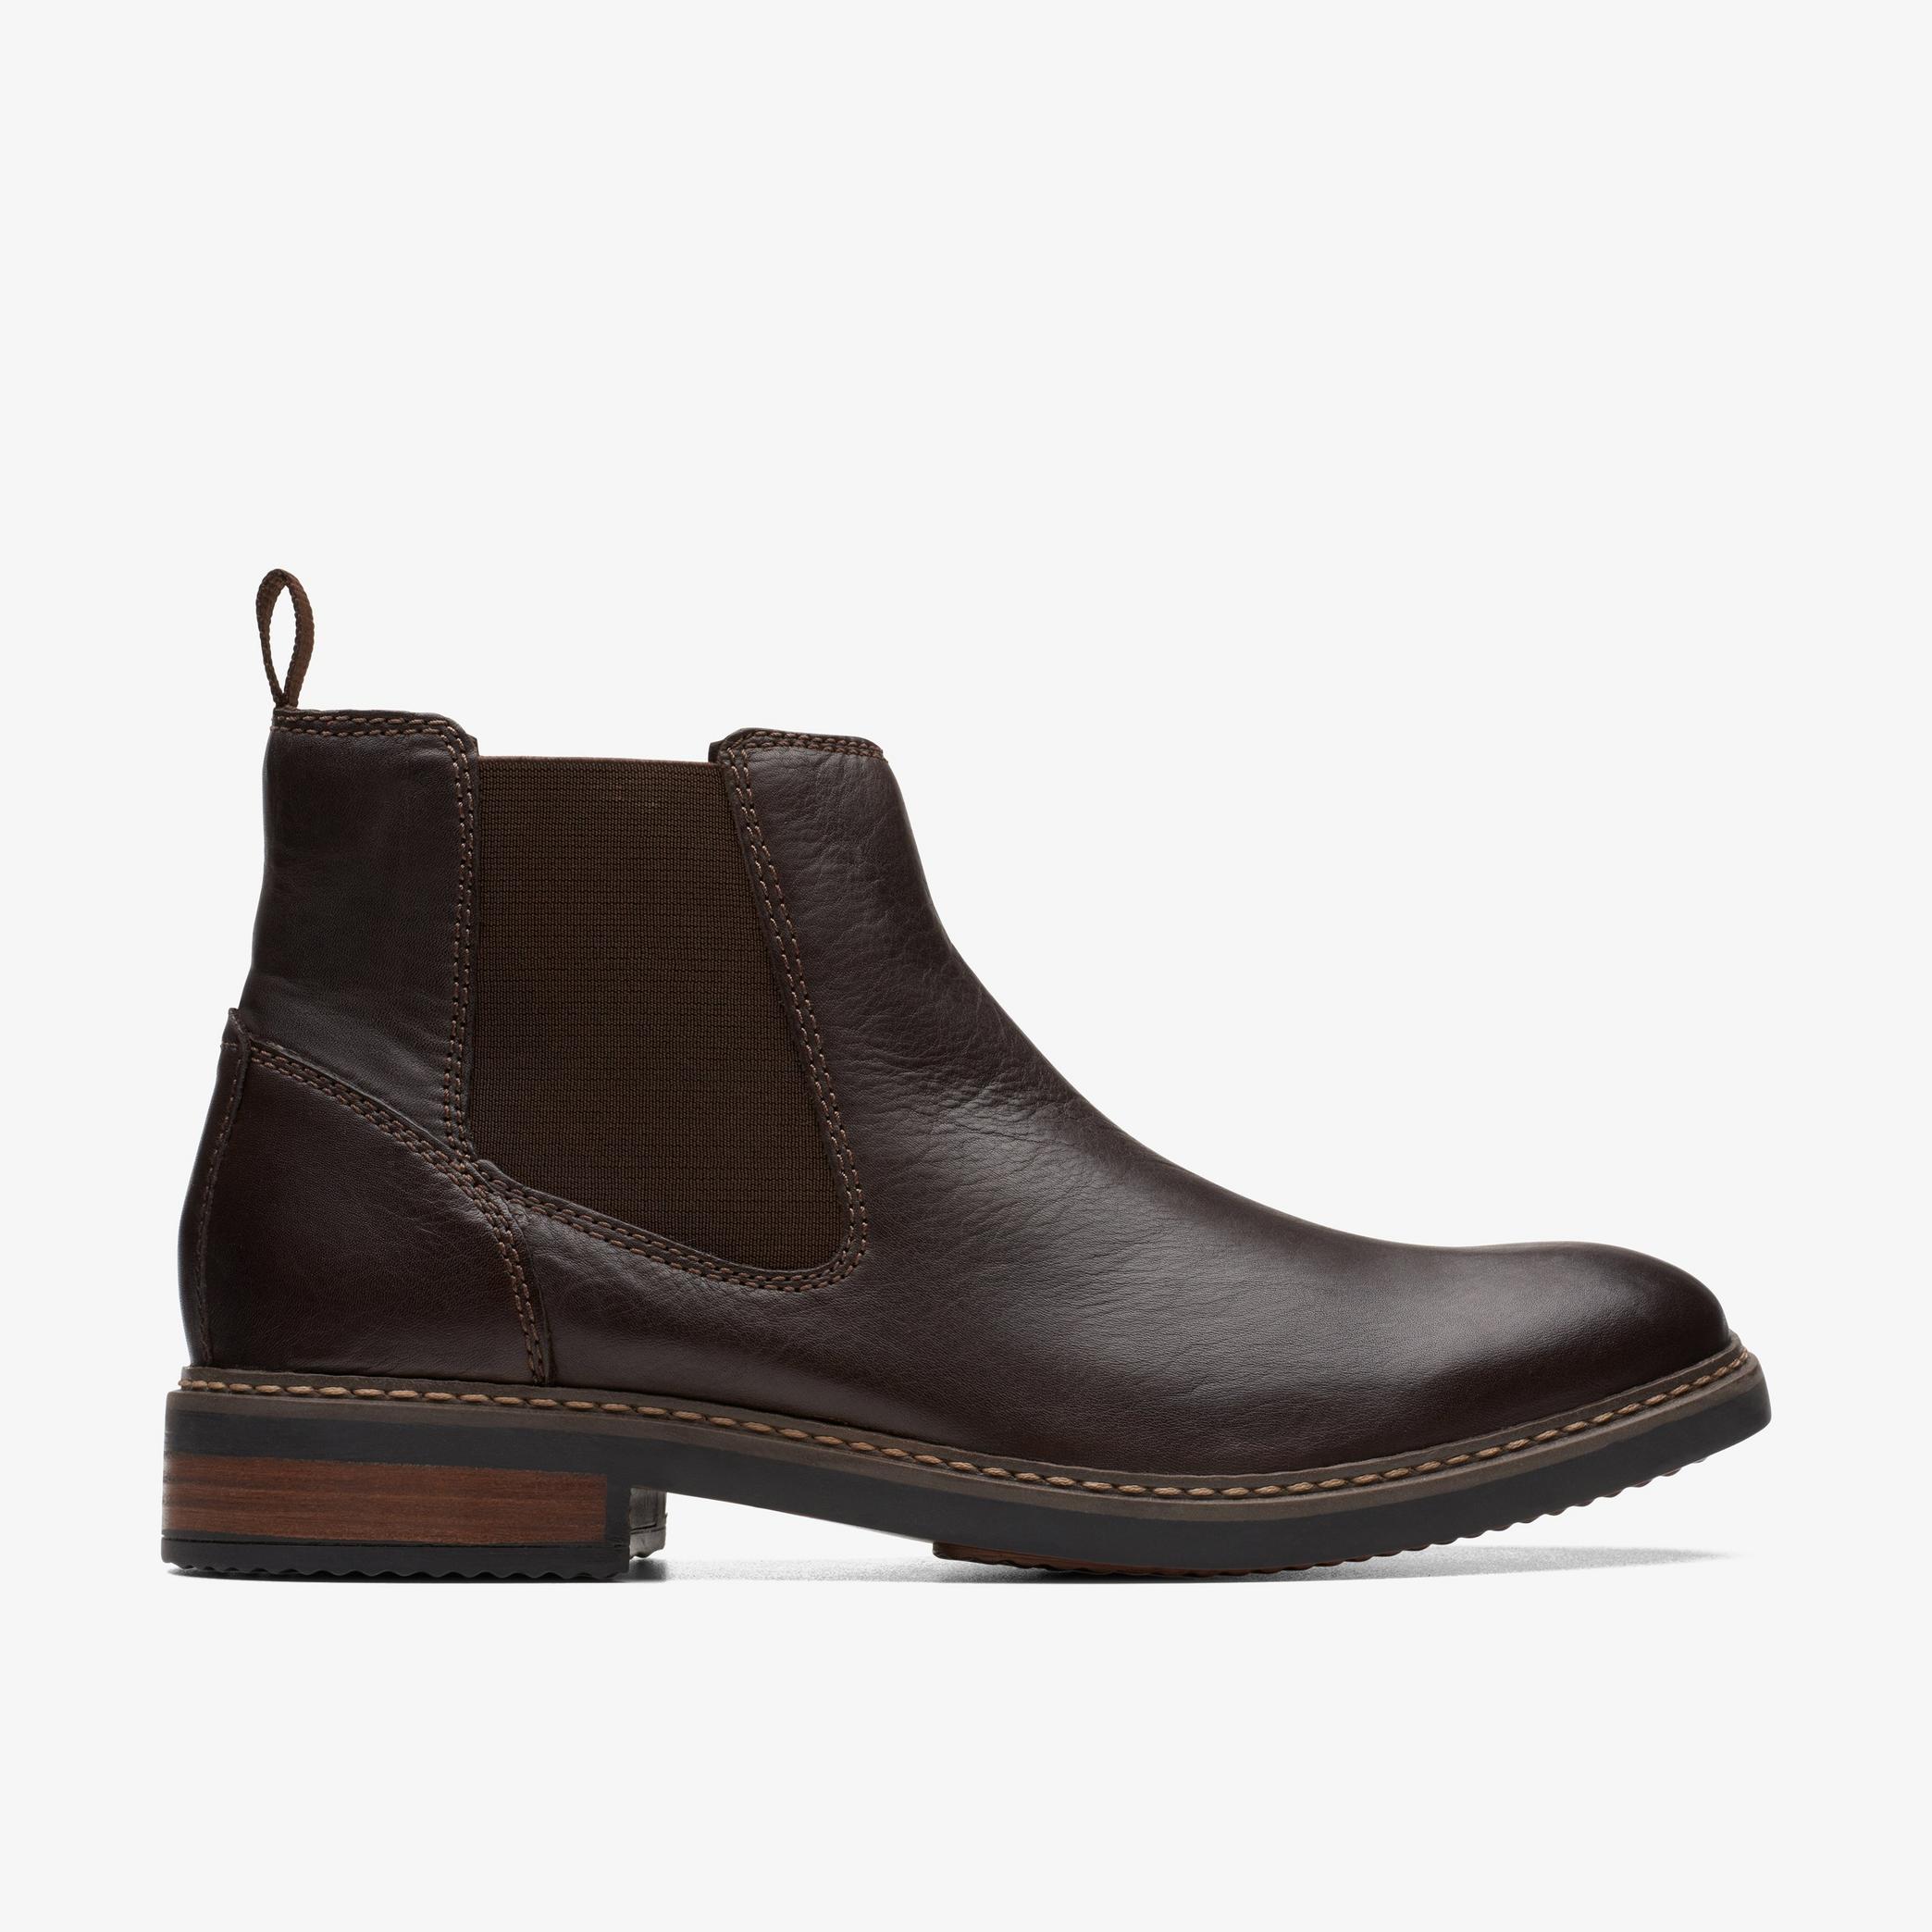 Blackford Top Dark Brown Leather Chelsea Boots, view 1 of 6